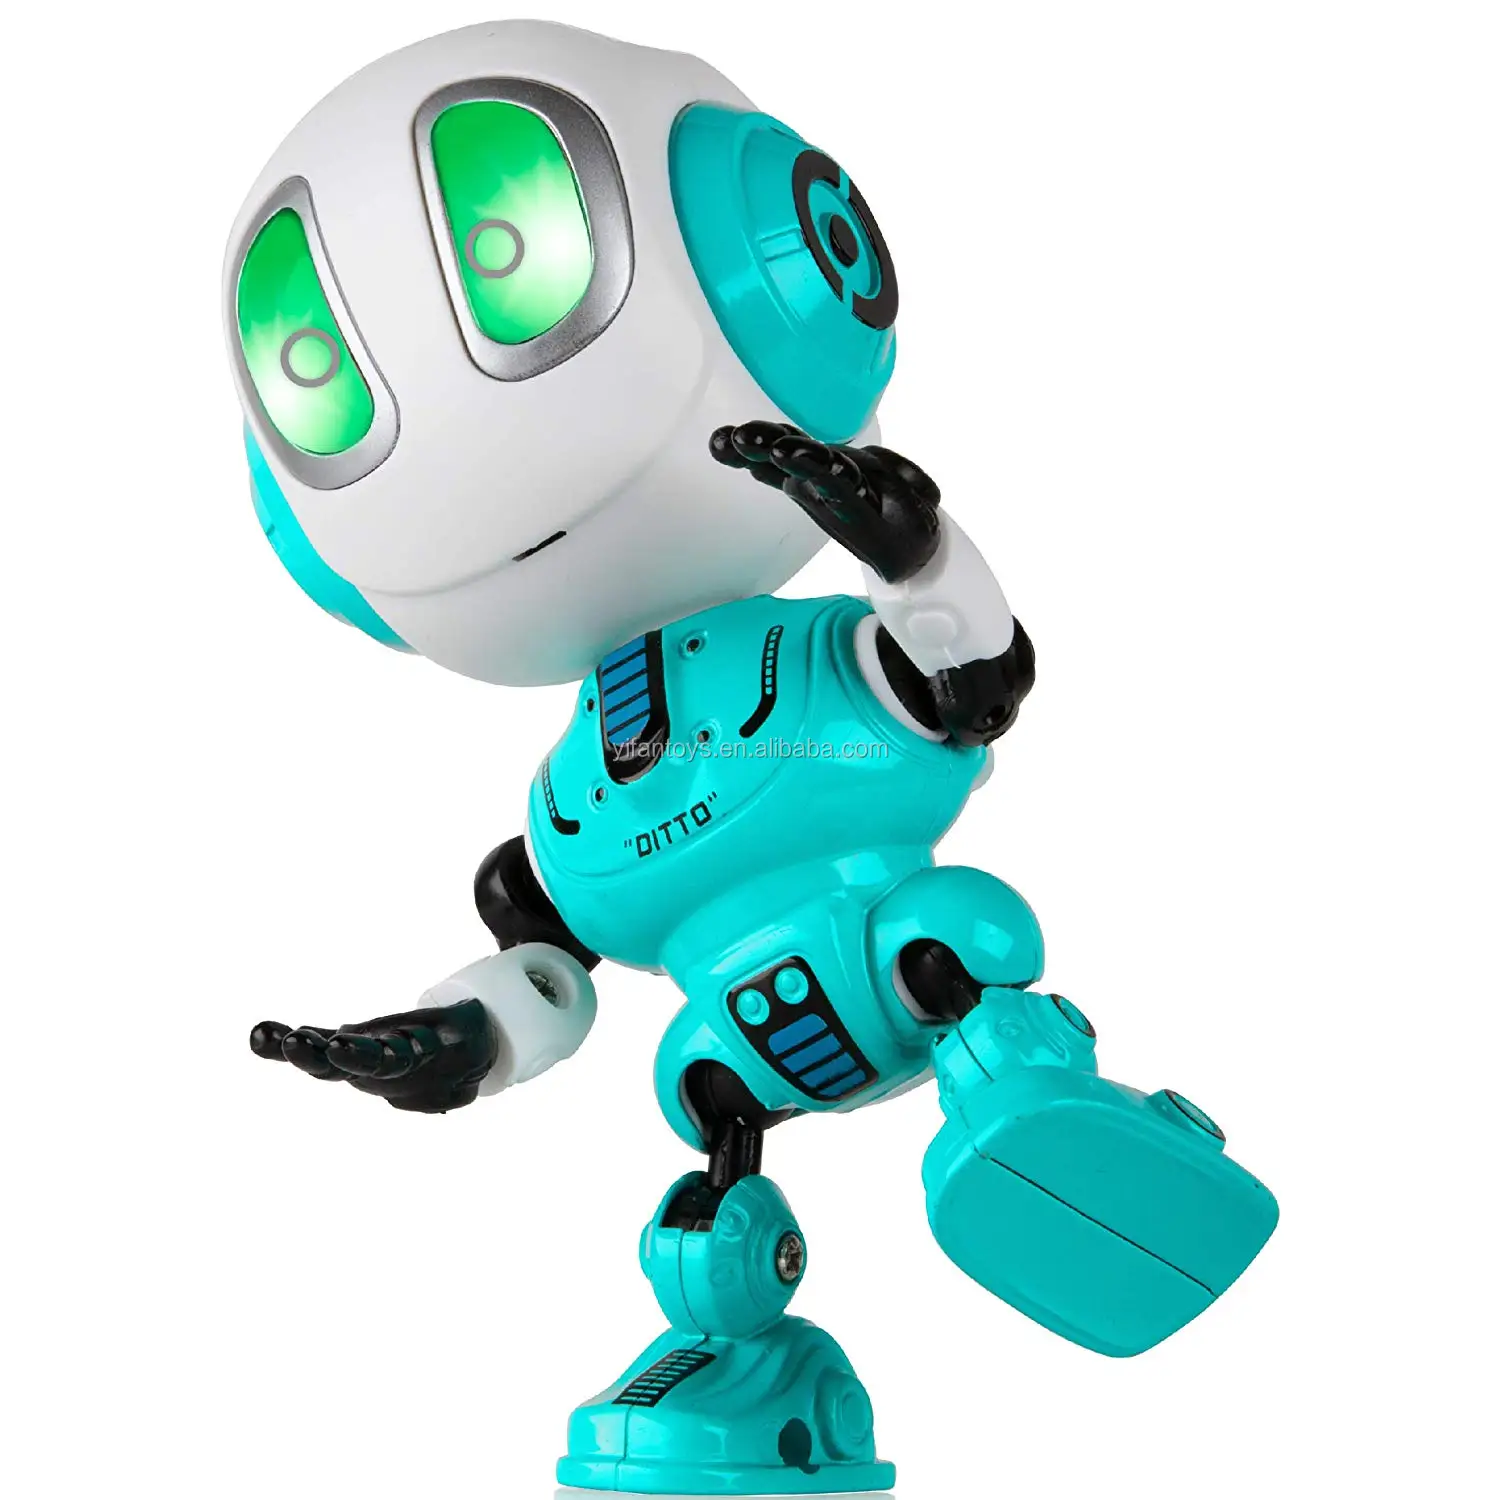 MY66-Q1202 Interactive Voice Charger Robots for Boys or Girls Talking & Alloy Body Mini Robot With Bright LED Eyes